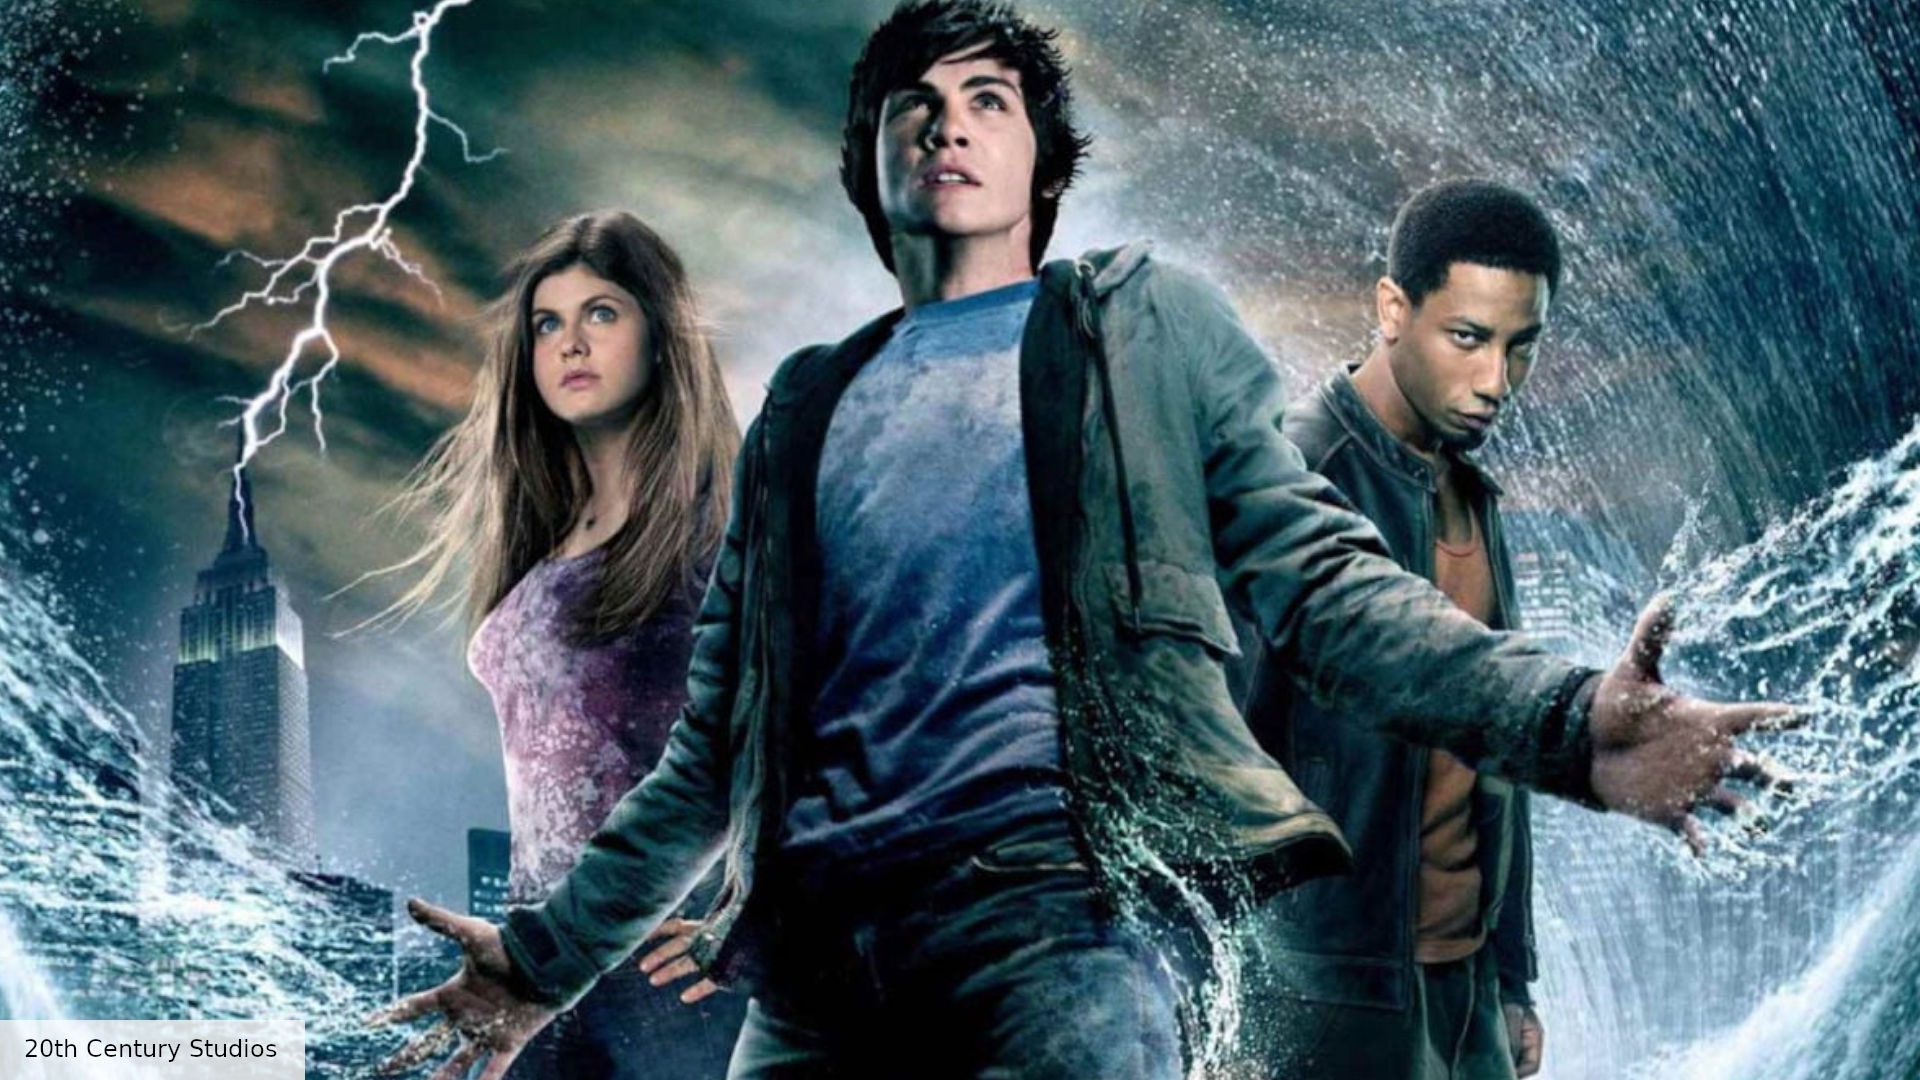 Percy Jackson TV sequence is including non-book scenes